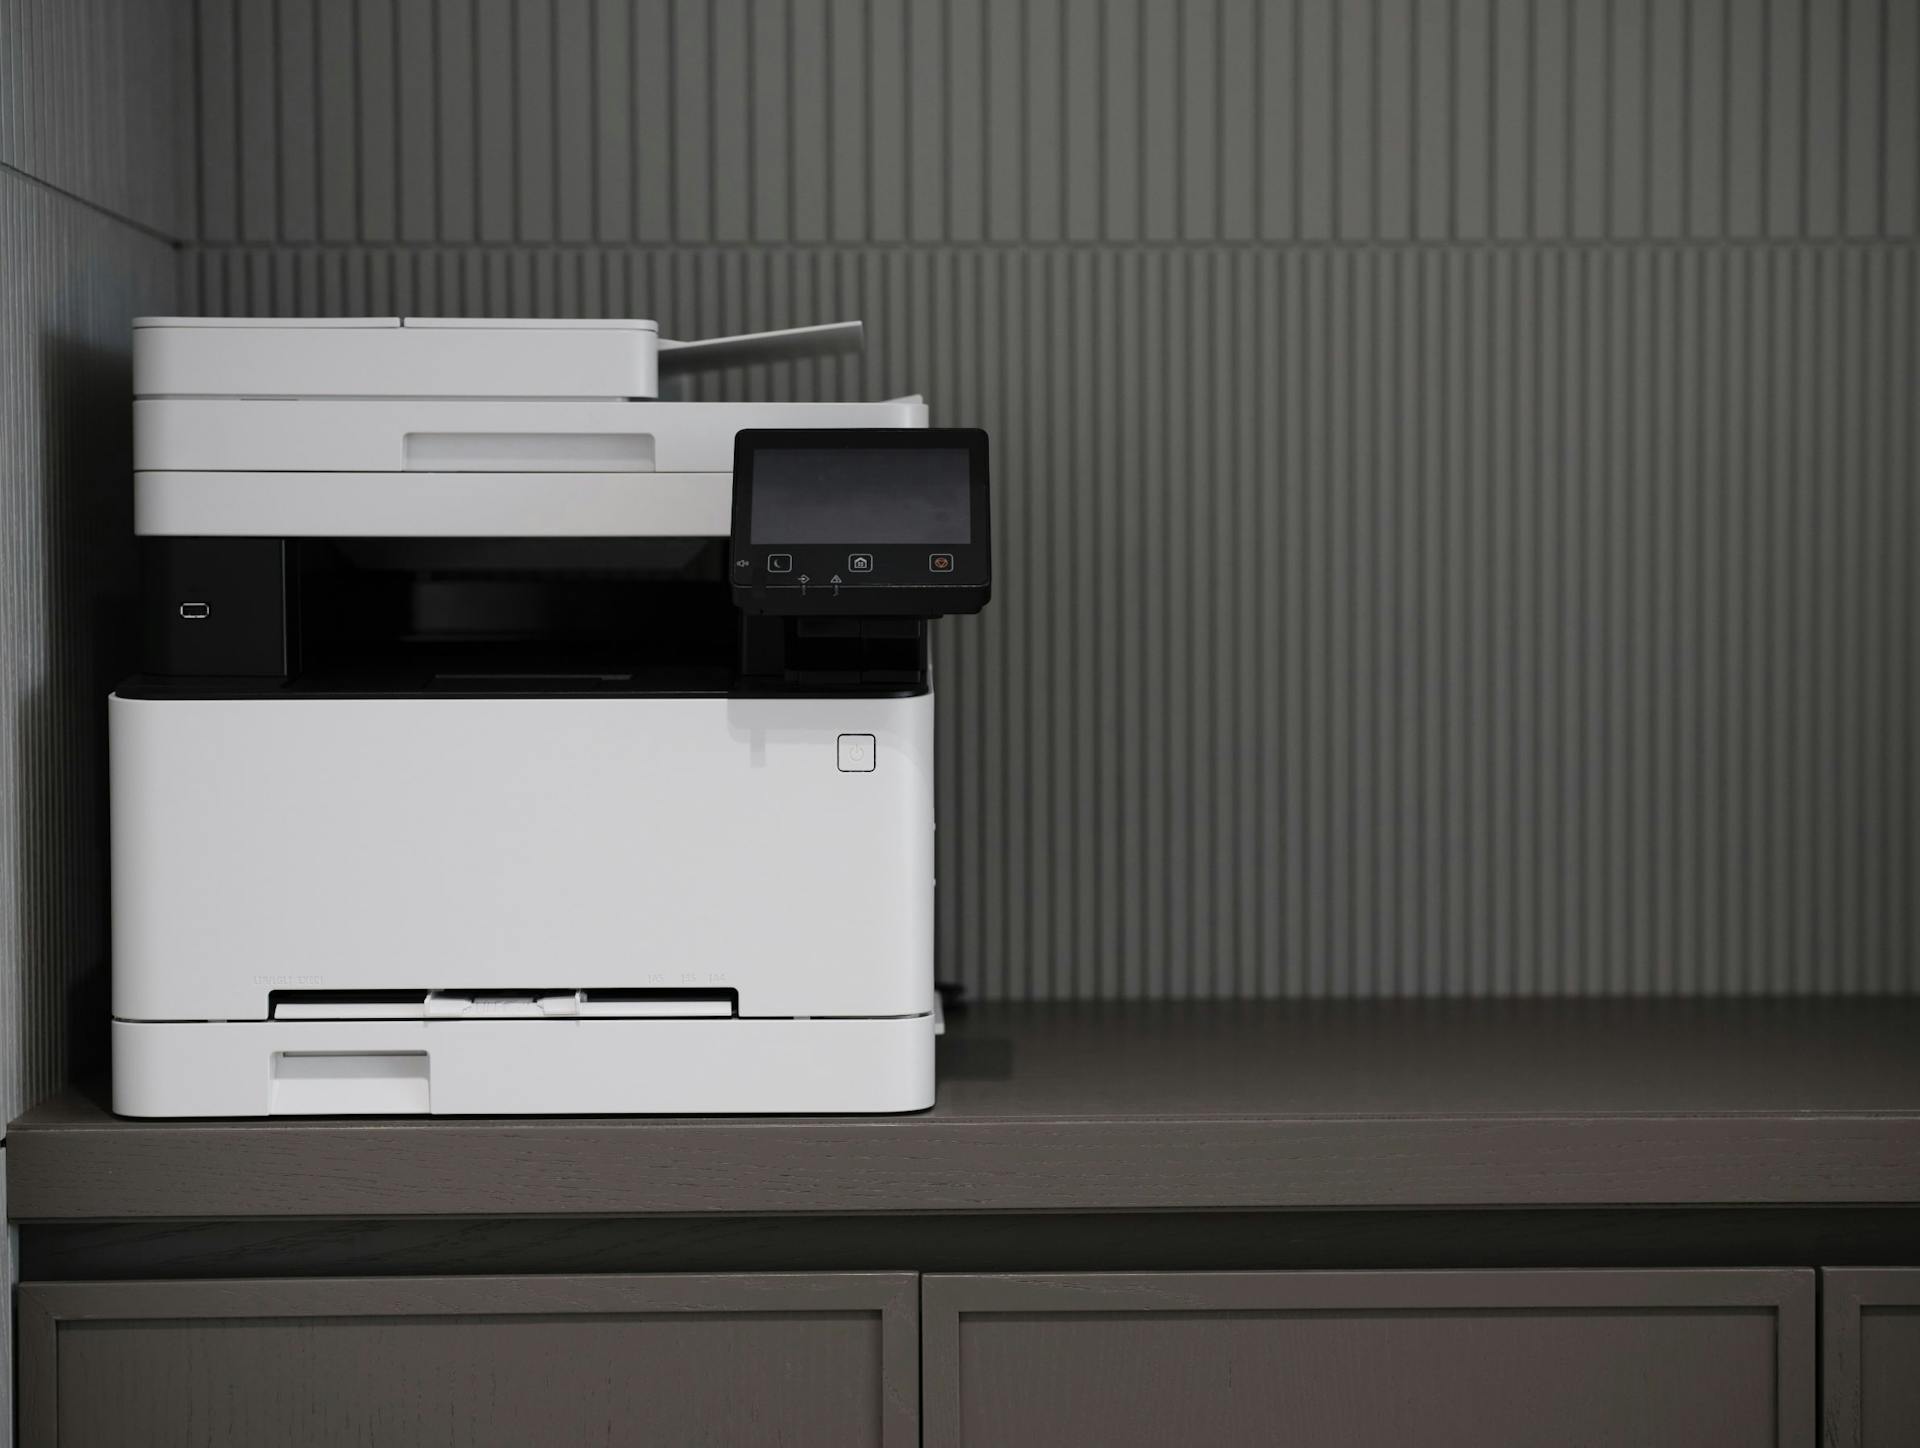 A printer for printing certificates.